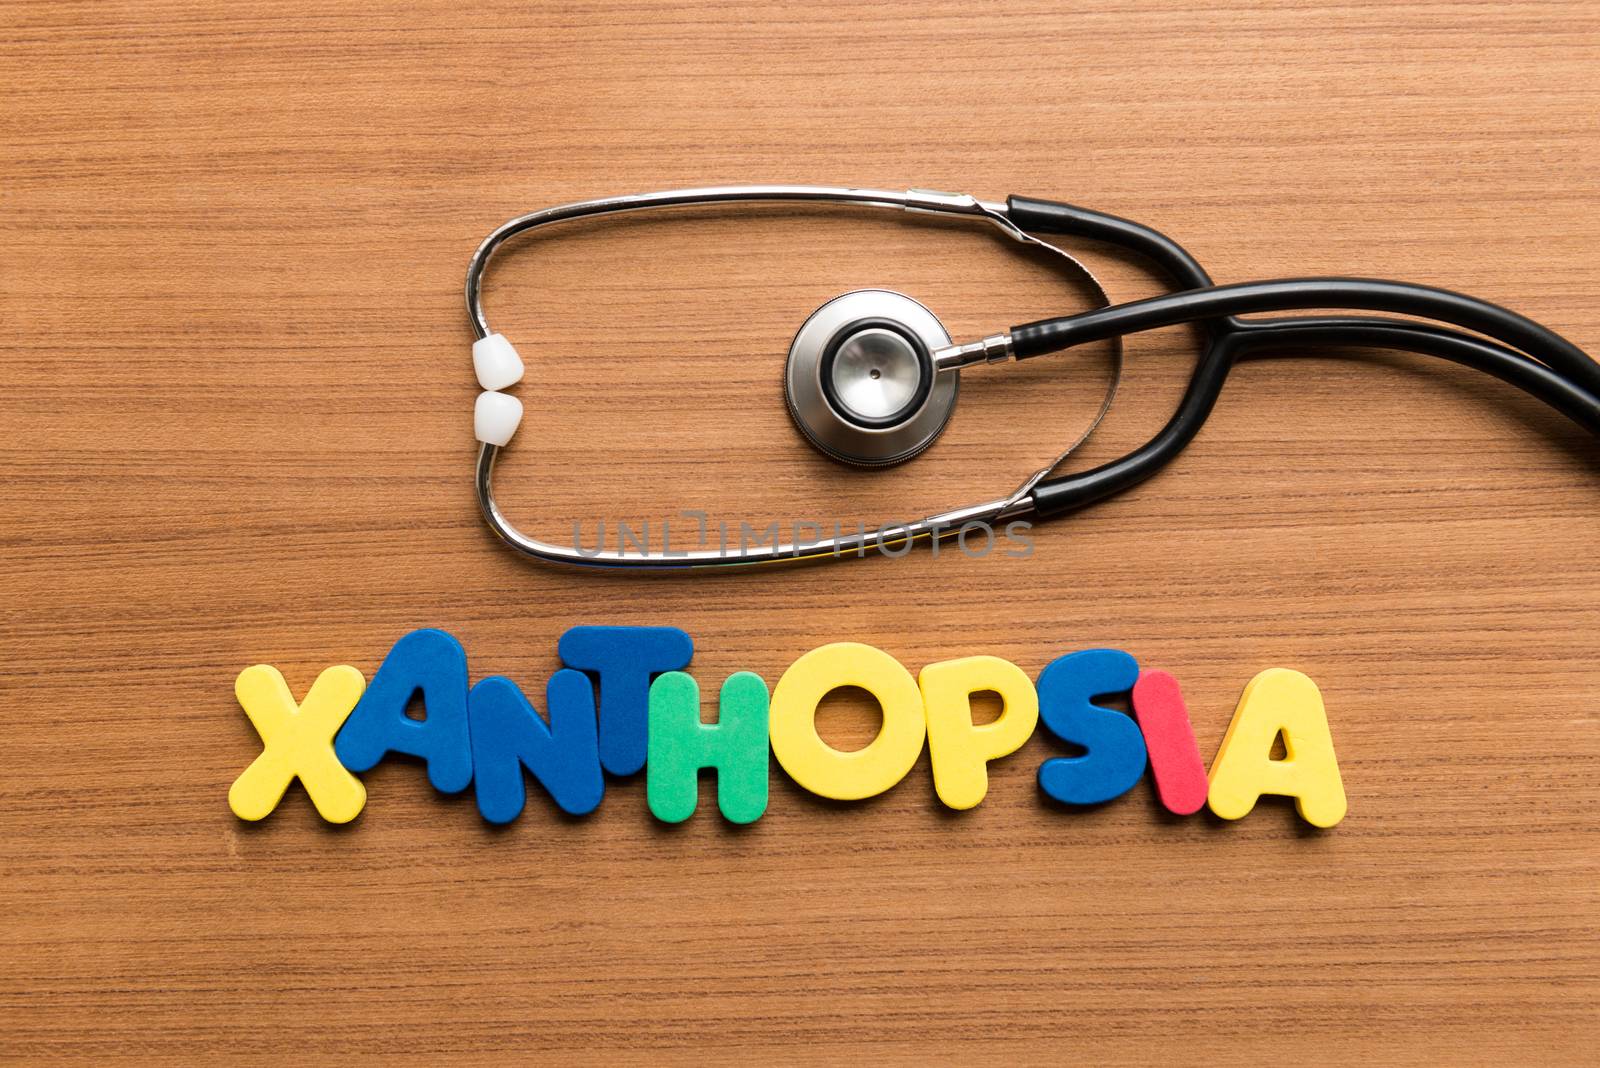 xanthopsia colorful word with stethoscope on wooden background